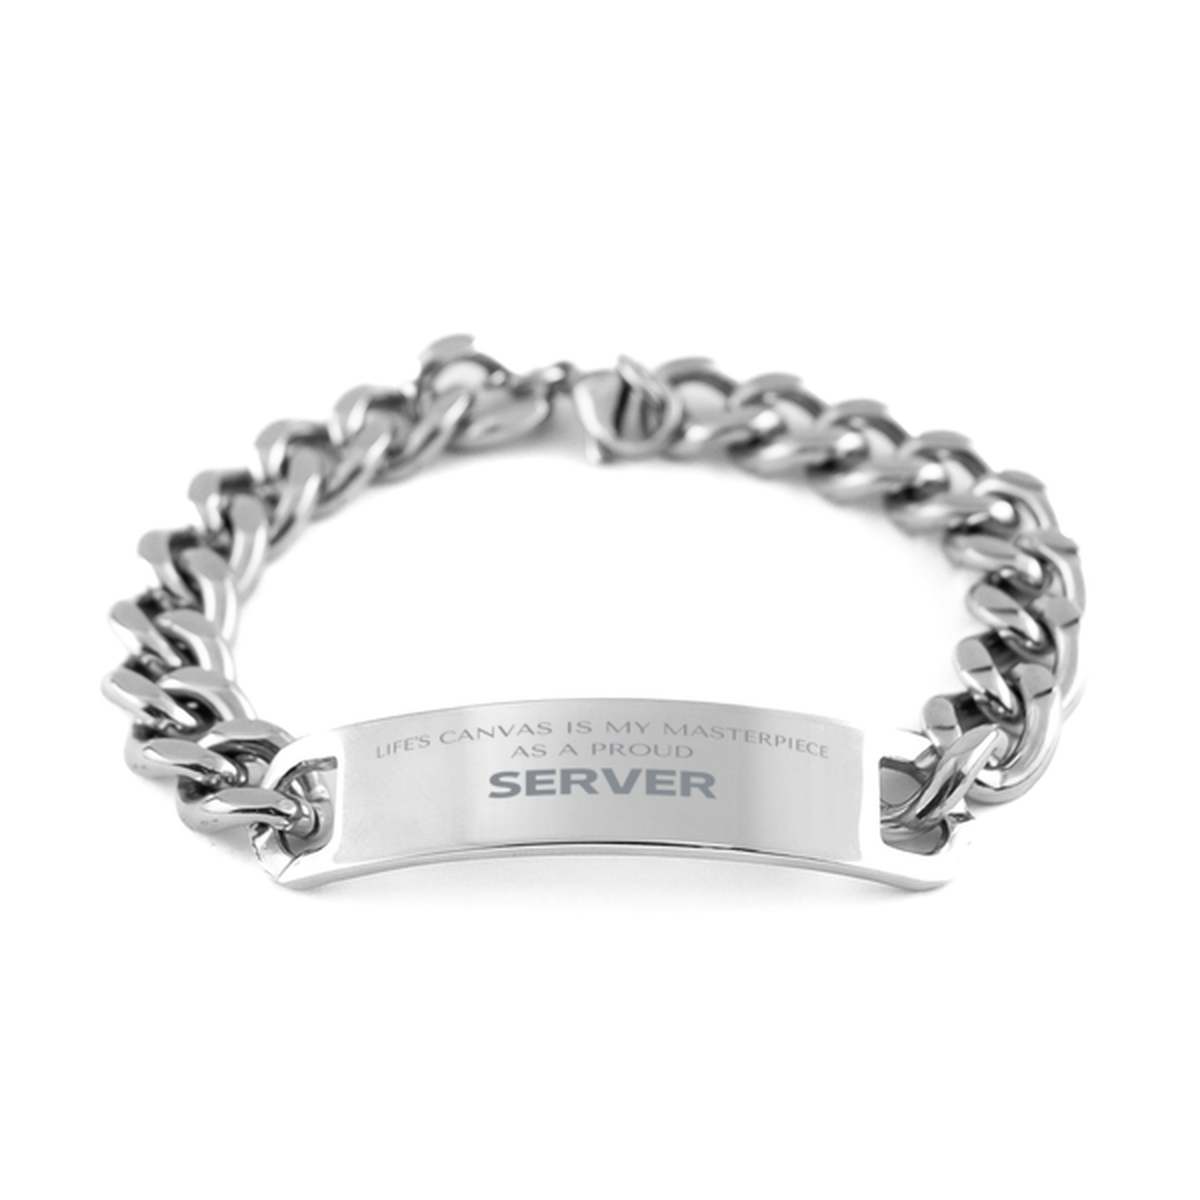 Proud Server Gifts, Life's canvas is my masterpiece, Epic Birthday Christmas Unique Cuban Chain Stainless Steel Bracelet For Server, Coworkers, Men, Women, Friends